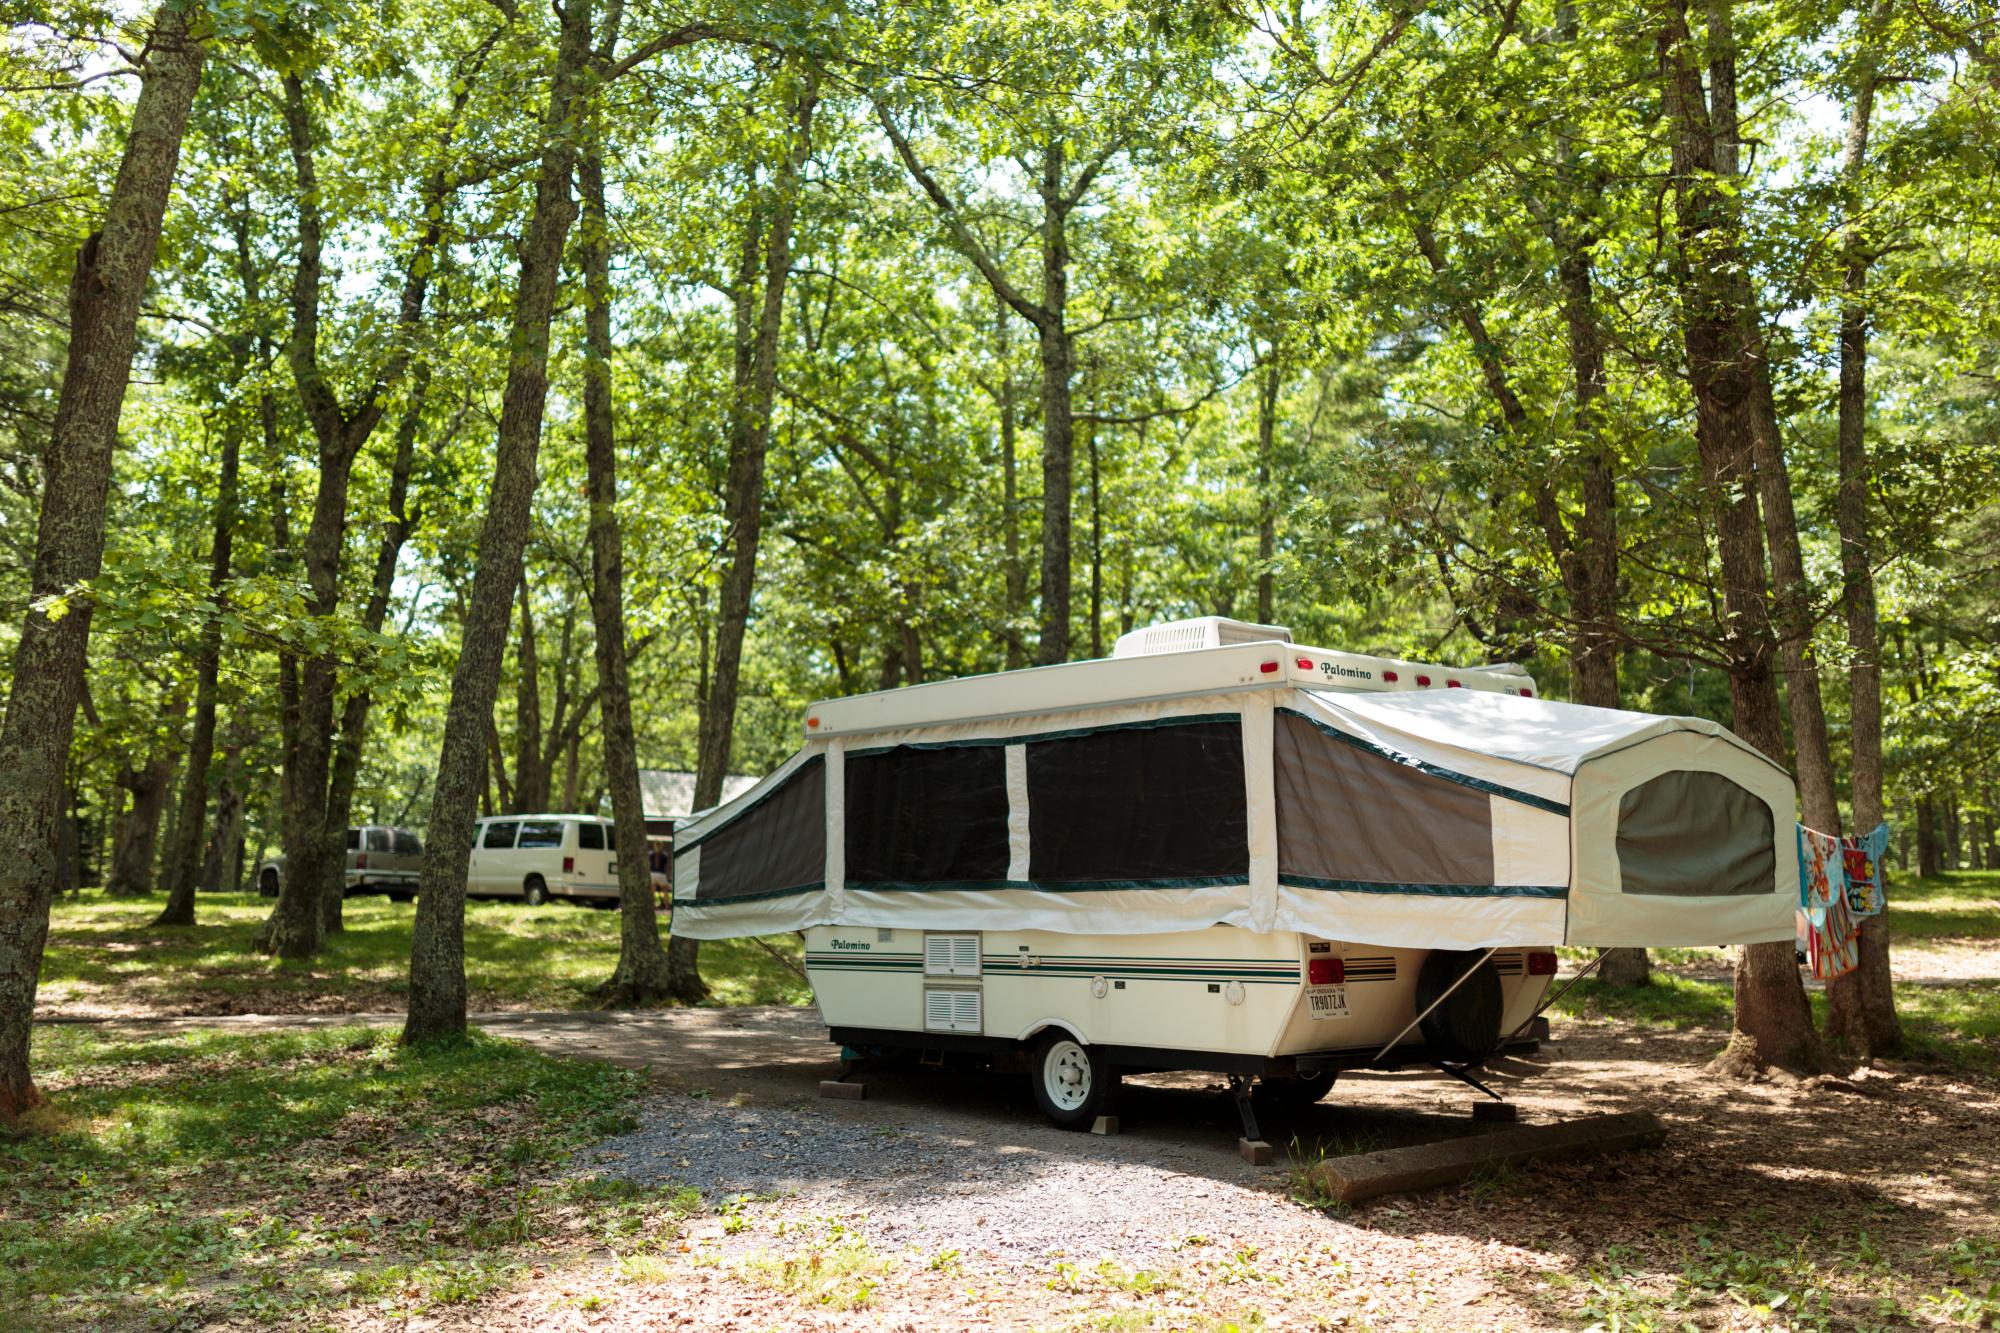 A small pop-up camper is parked in a campground with green trees overhead.